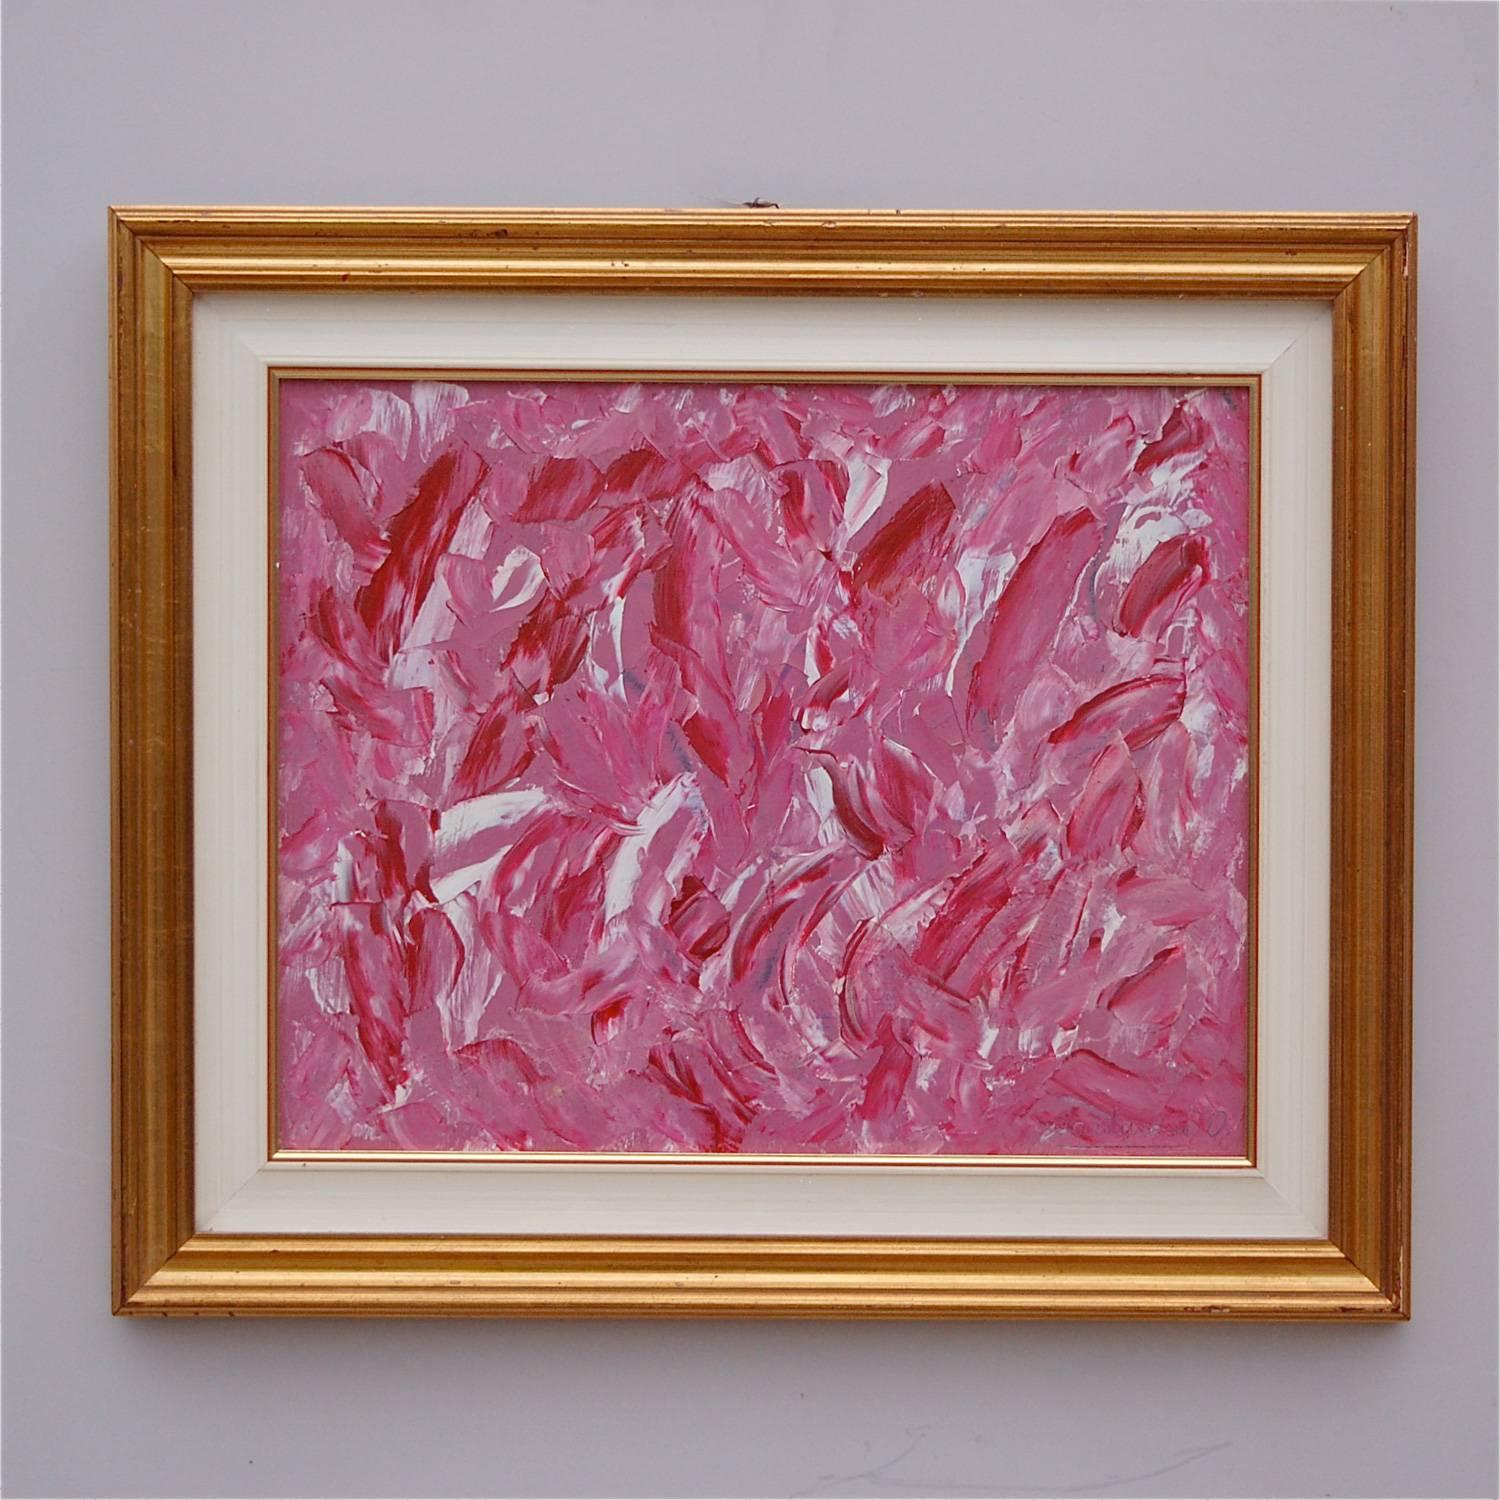 Modern, contemporary, abstract expressionist oil painting by unknown artist. The piece is signed but despite our best efforts we have been unable to identify the maker. The artist has created a strong dynamic by combining the use of white and soft